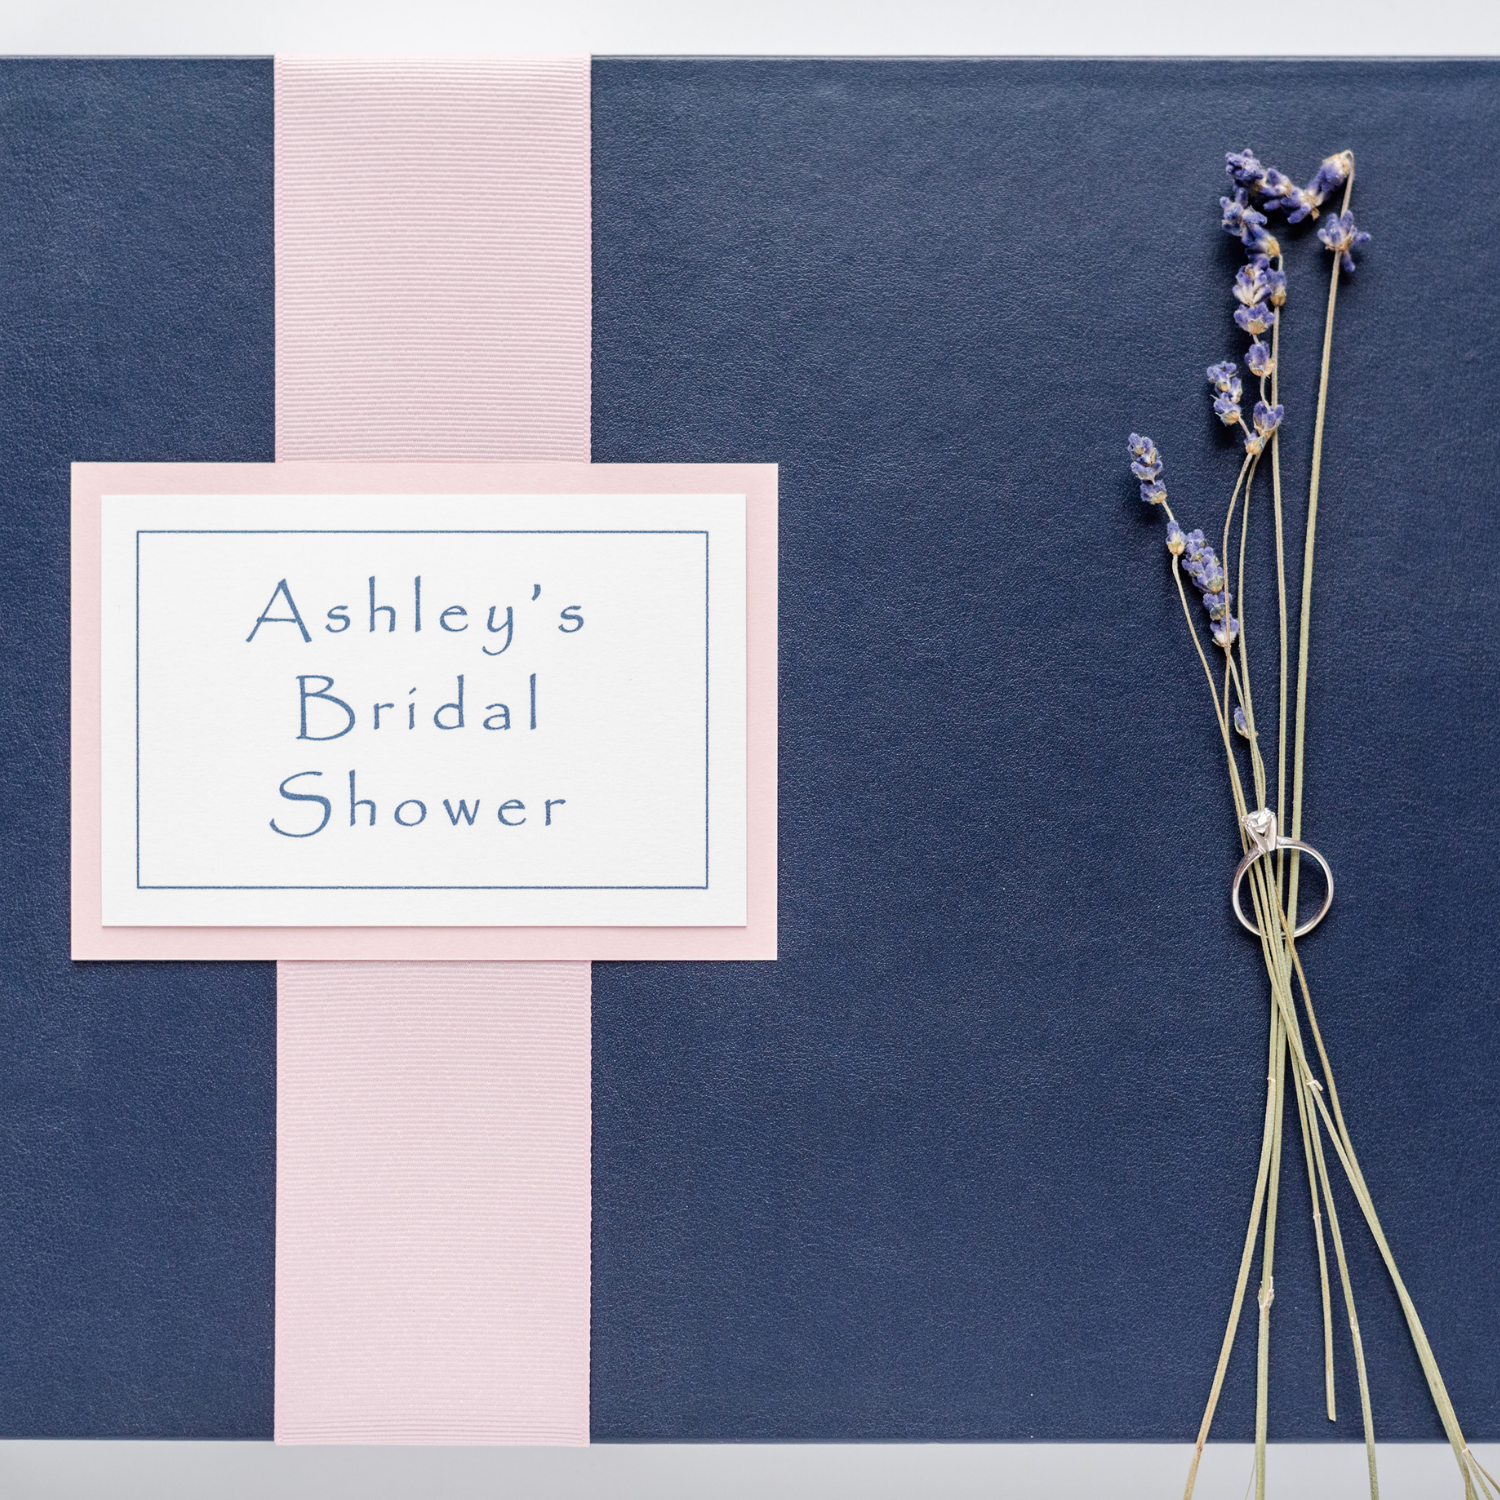 Wedding shower keepsake book in marine leather with pink ribbon and plaque